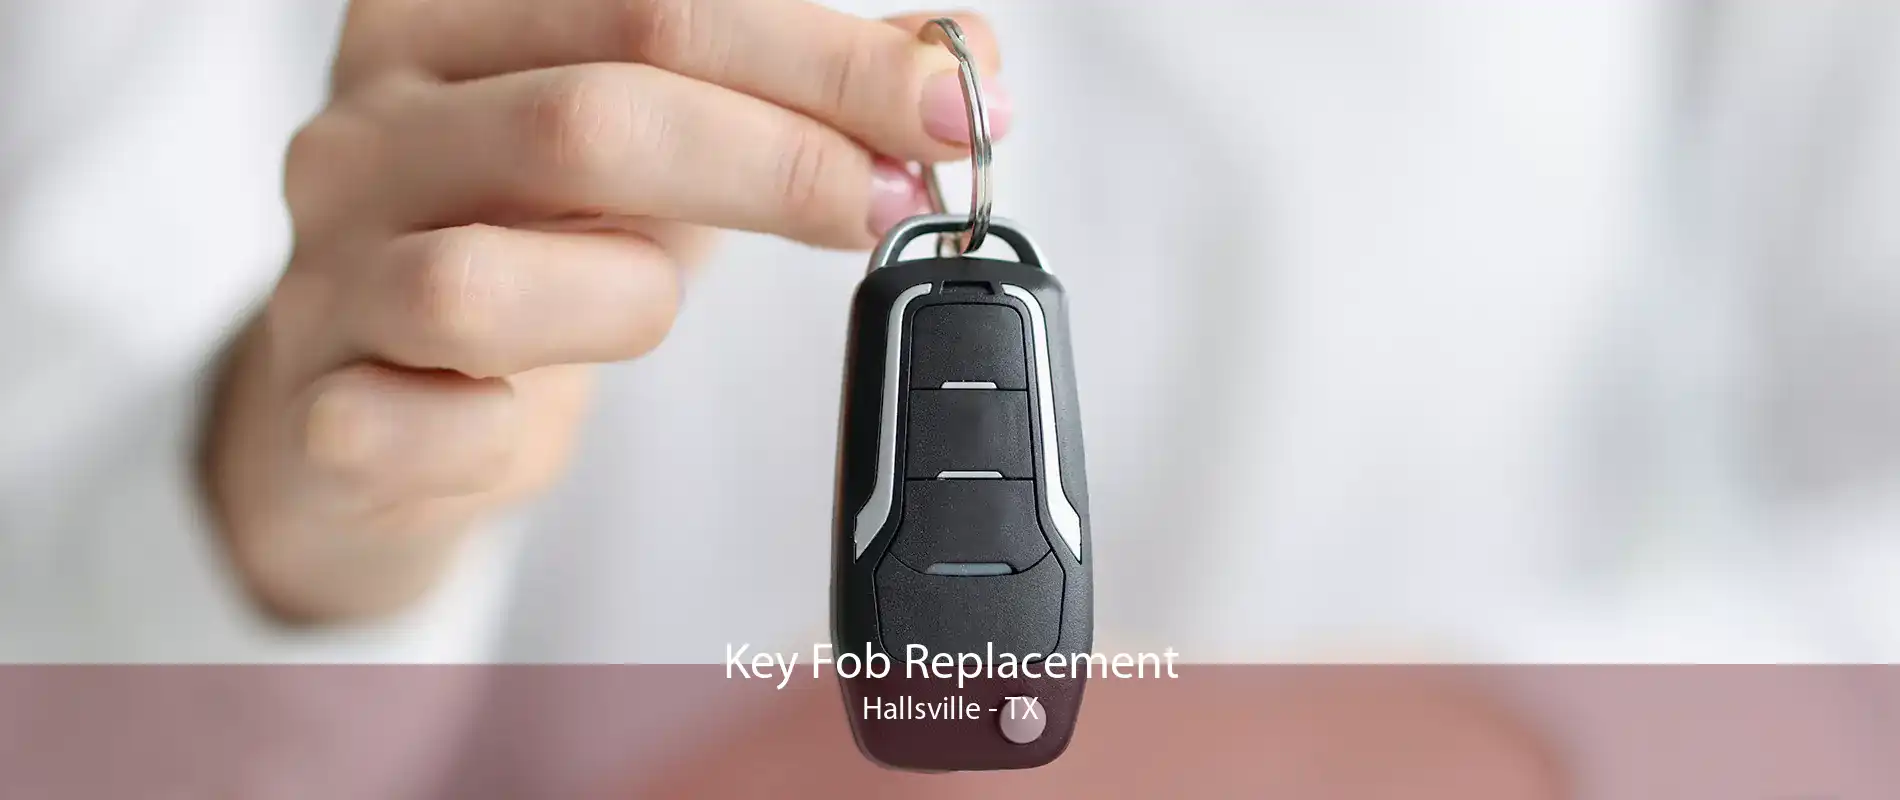 Key Fob Replacement Hallsville - TX